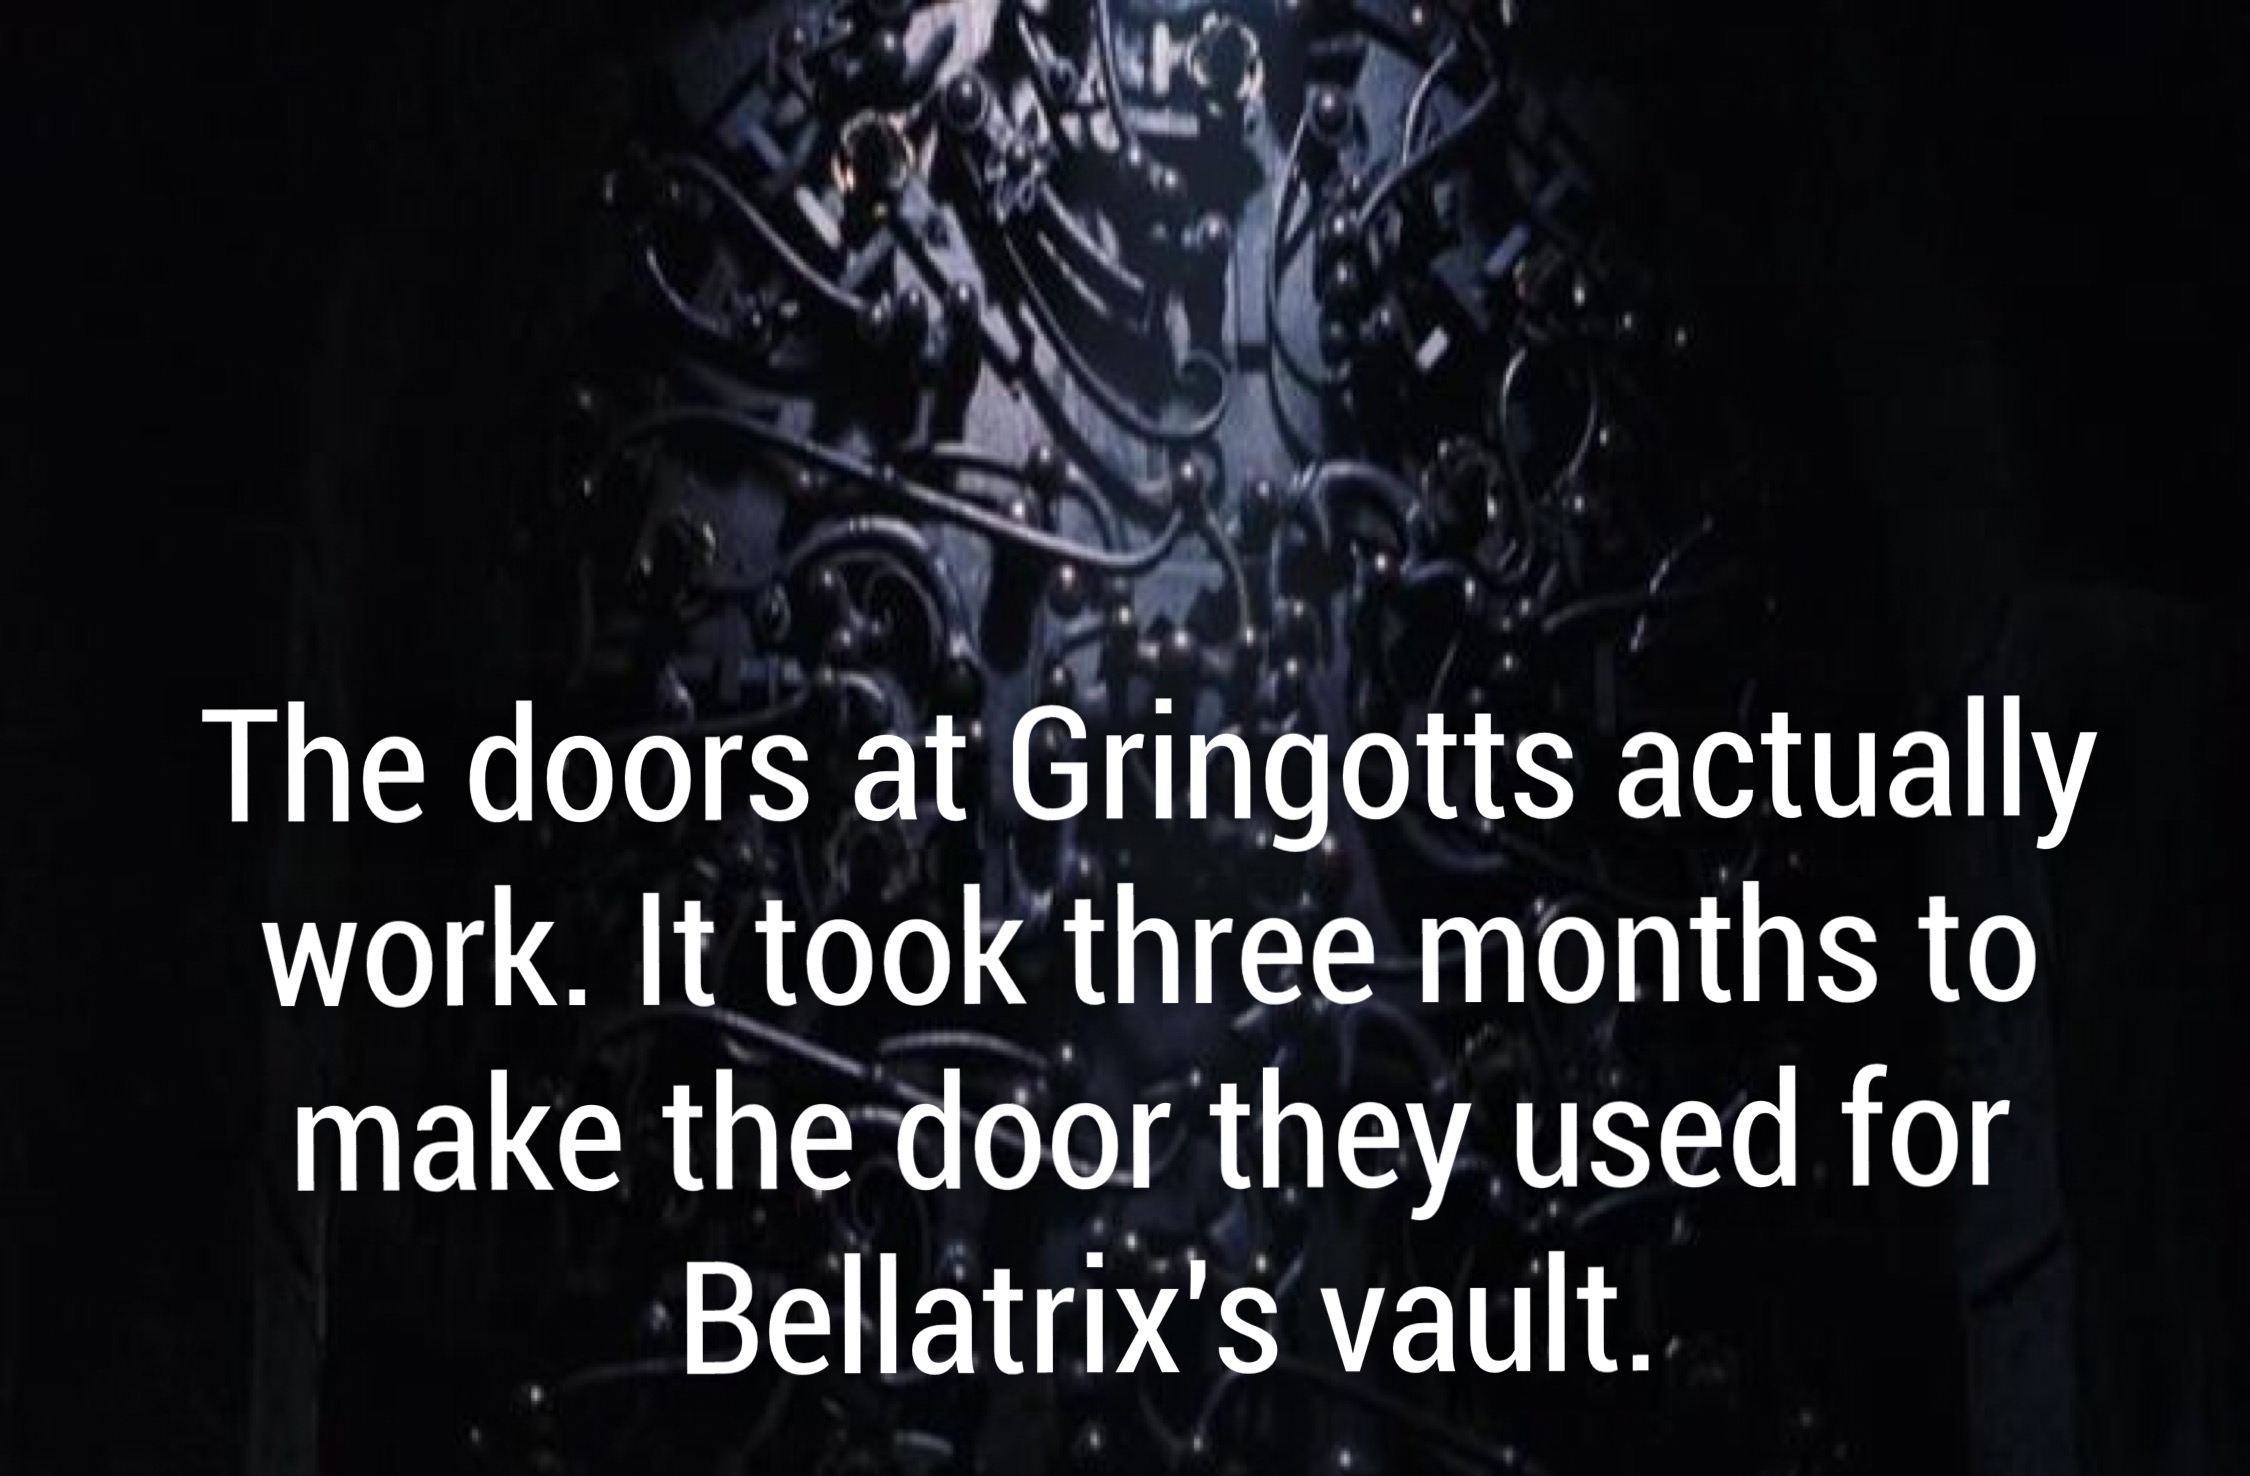 darkness - The doors at Gringotts actually work. It took three months to make the door they used for Bellatrix's vault.